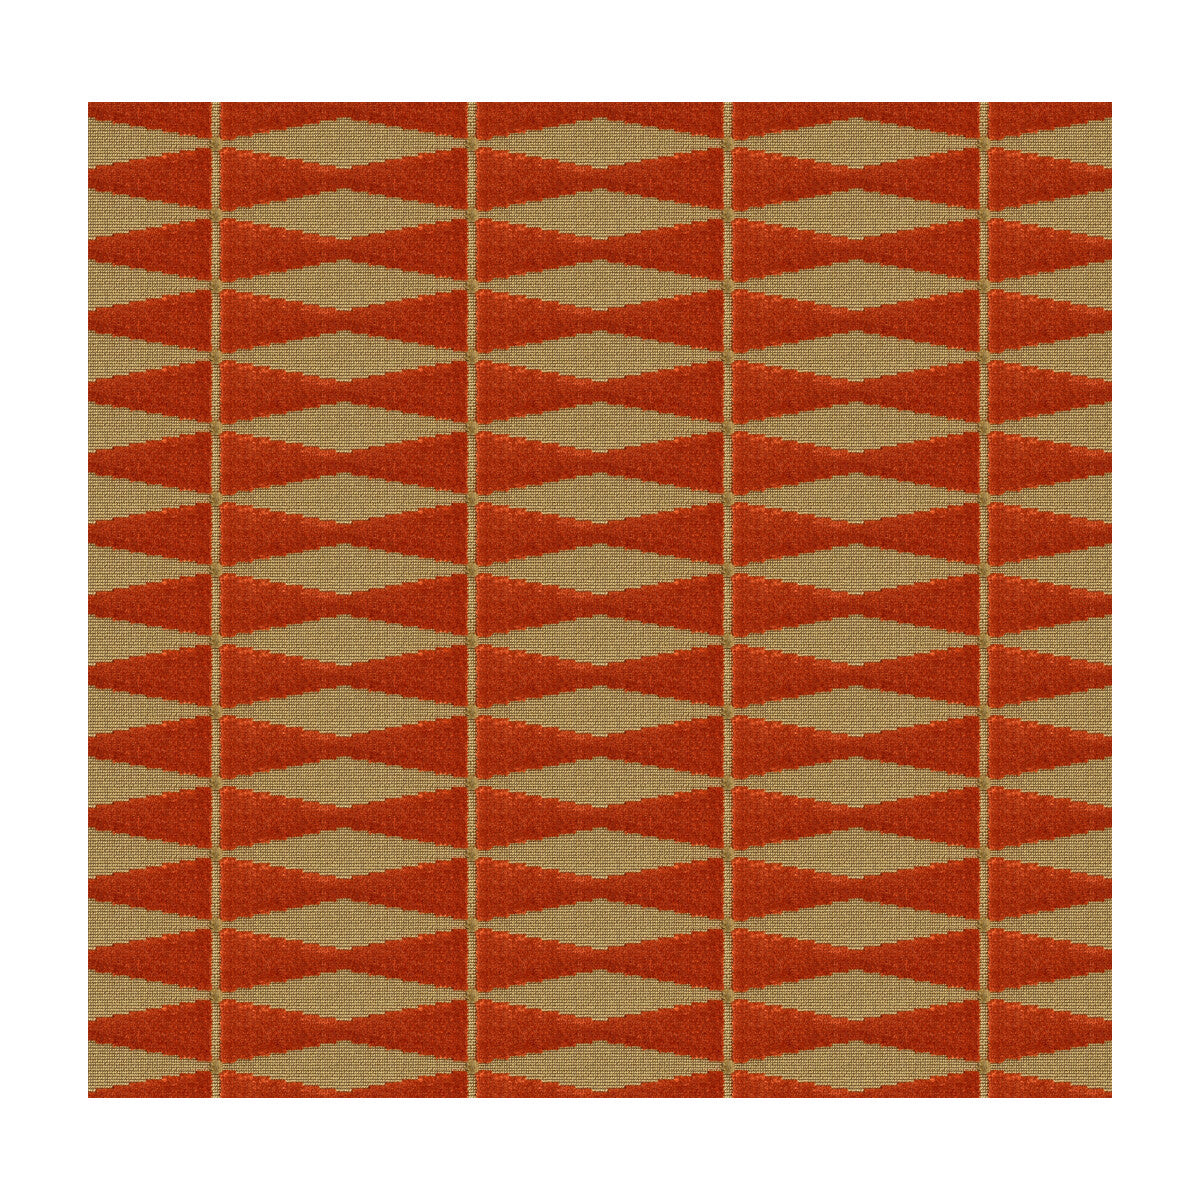 Skylark fabric in yam color - pattern 33648.12.0 - by Kravet Couture in the Michael Berman II Collection collection